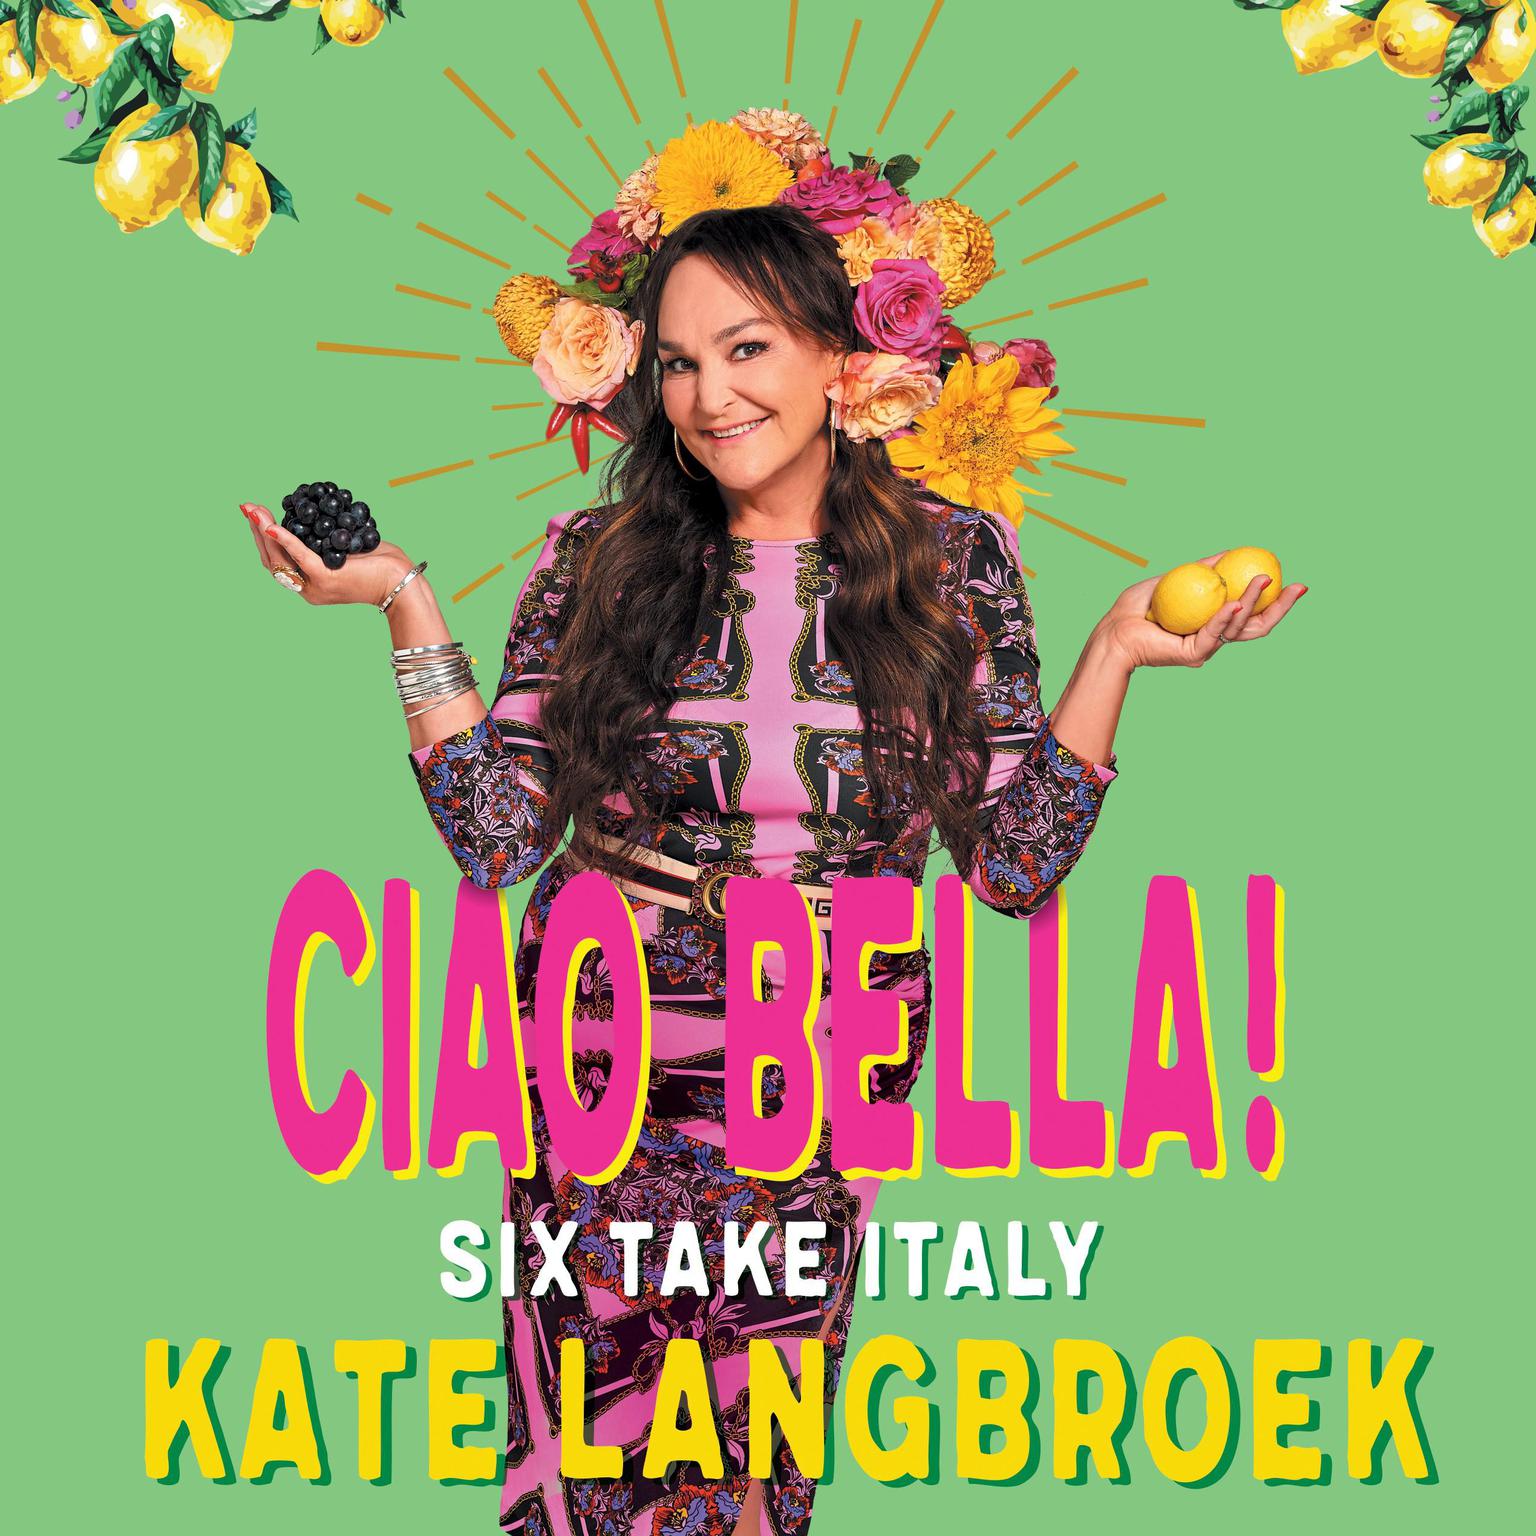 Ciao Bella!: Six Take Italy Audiobook, by Kate Langbroek